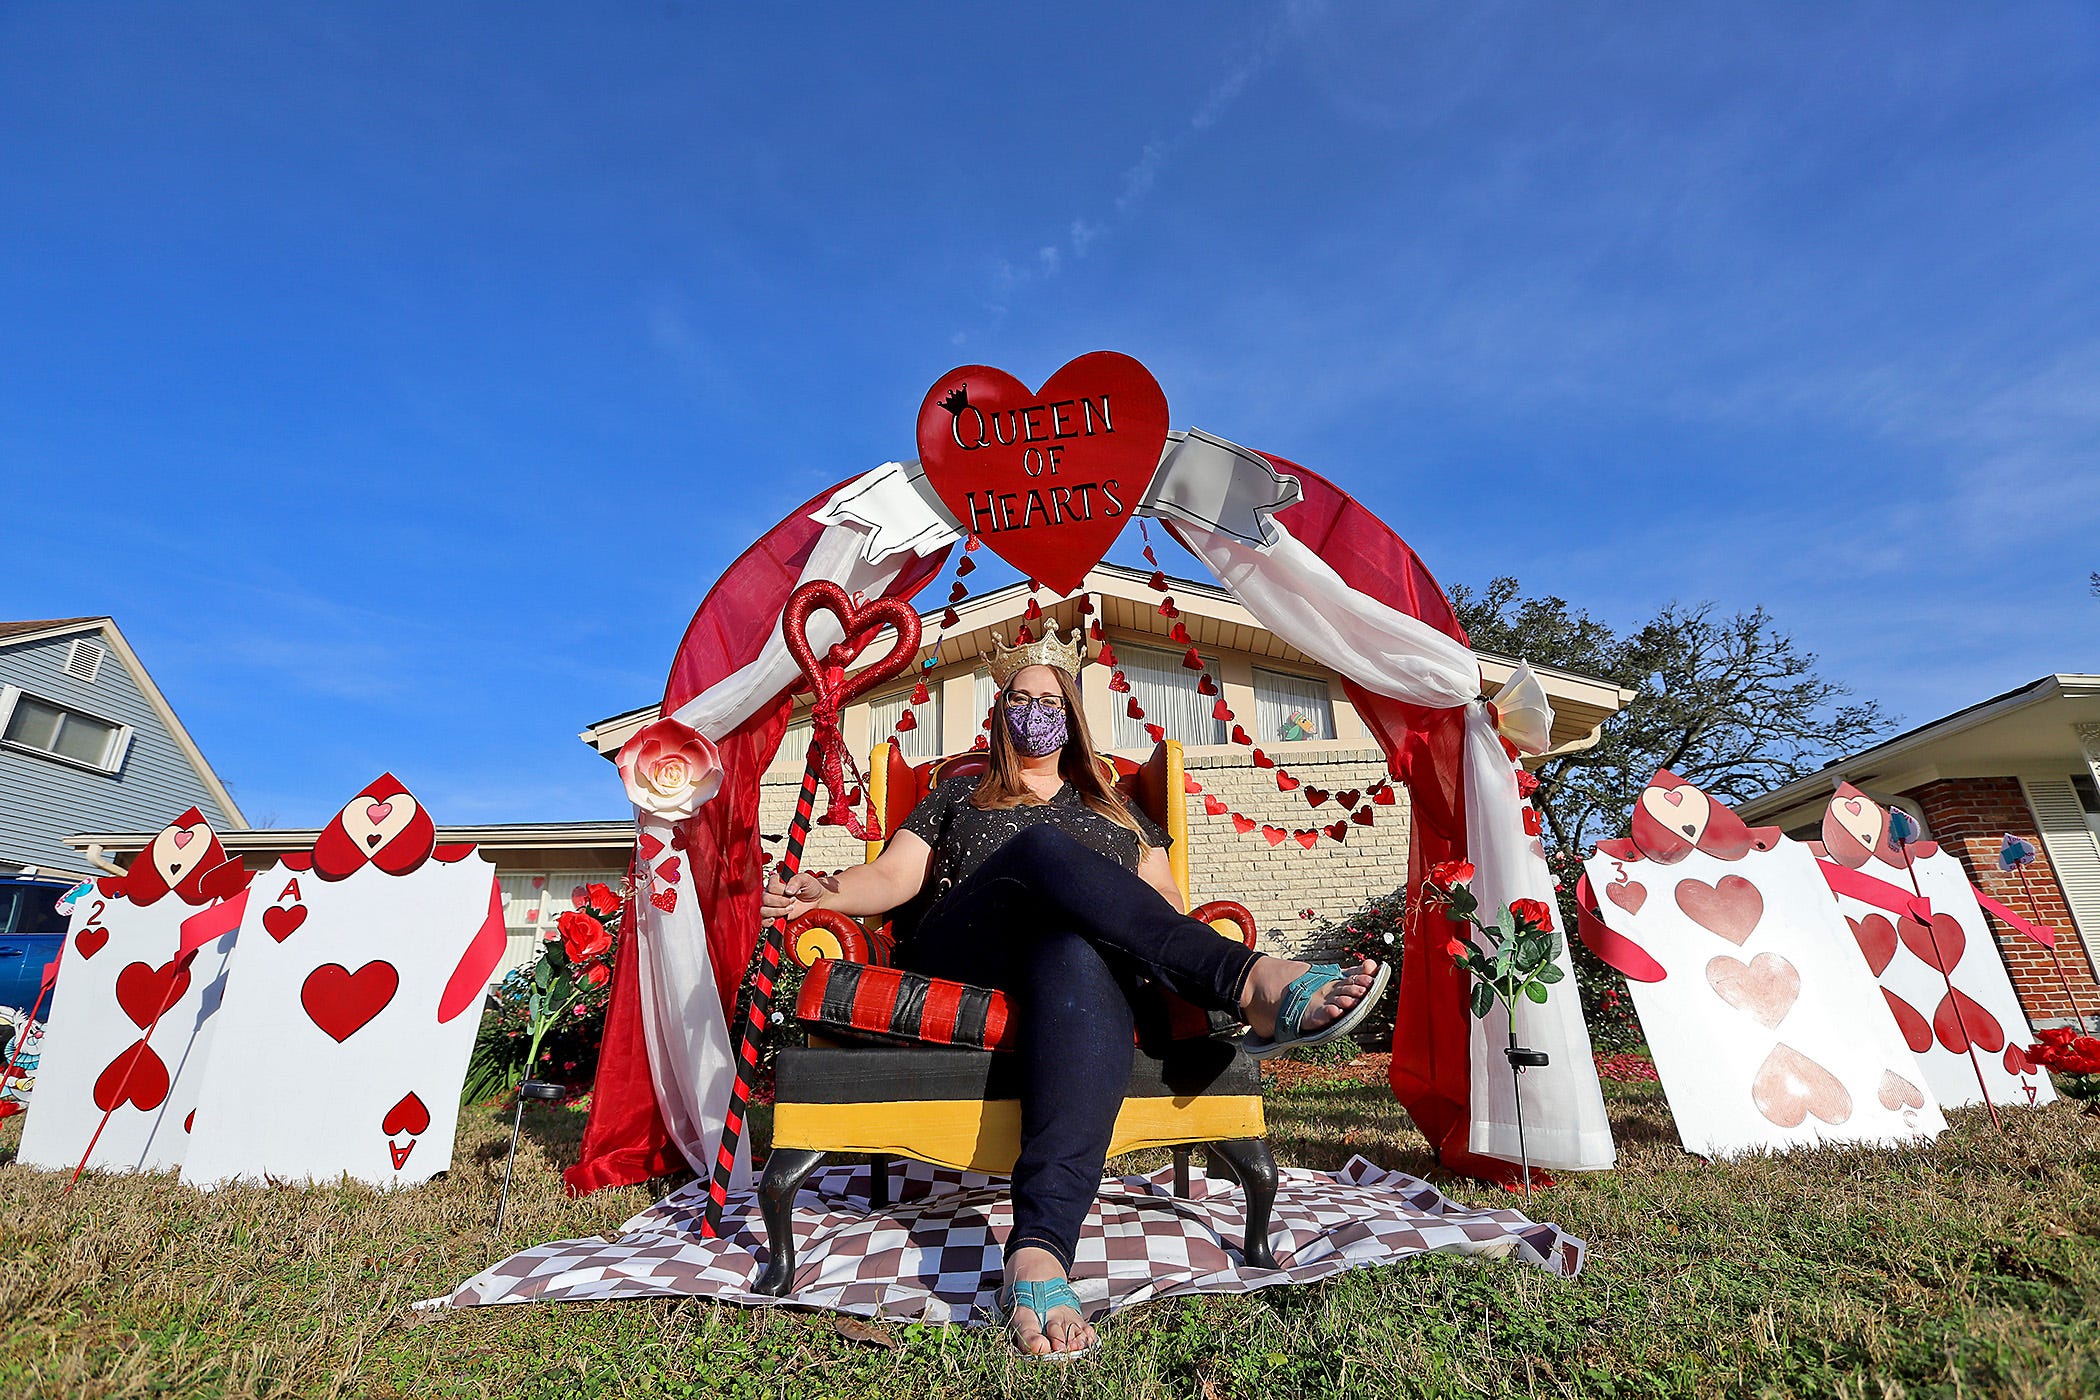 Mardi Gras Spirit Lives On In New Orleans In Colorful House Floats